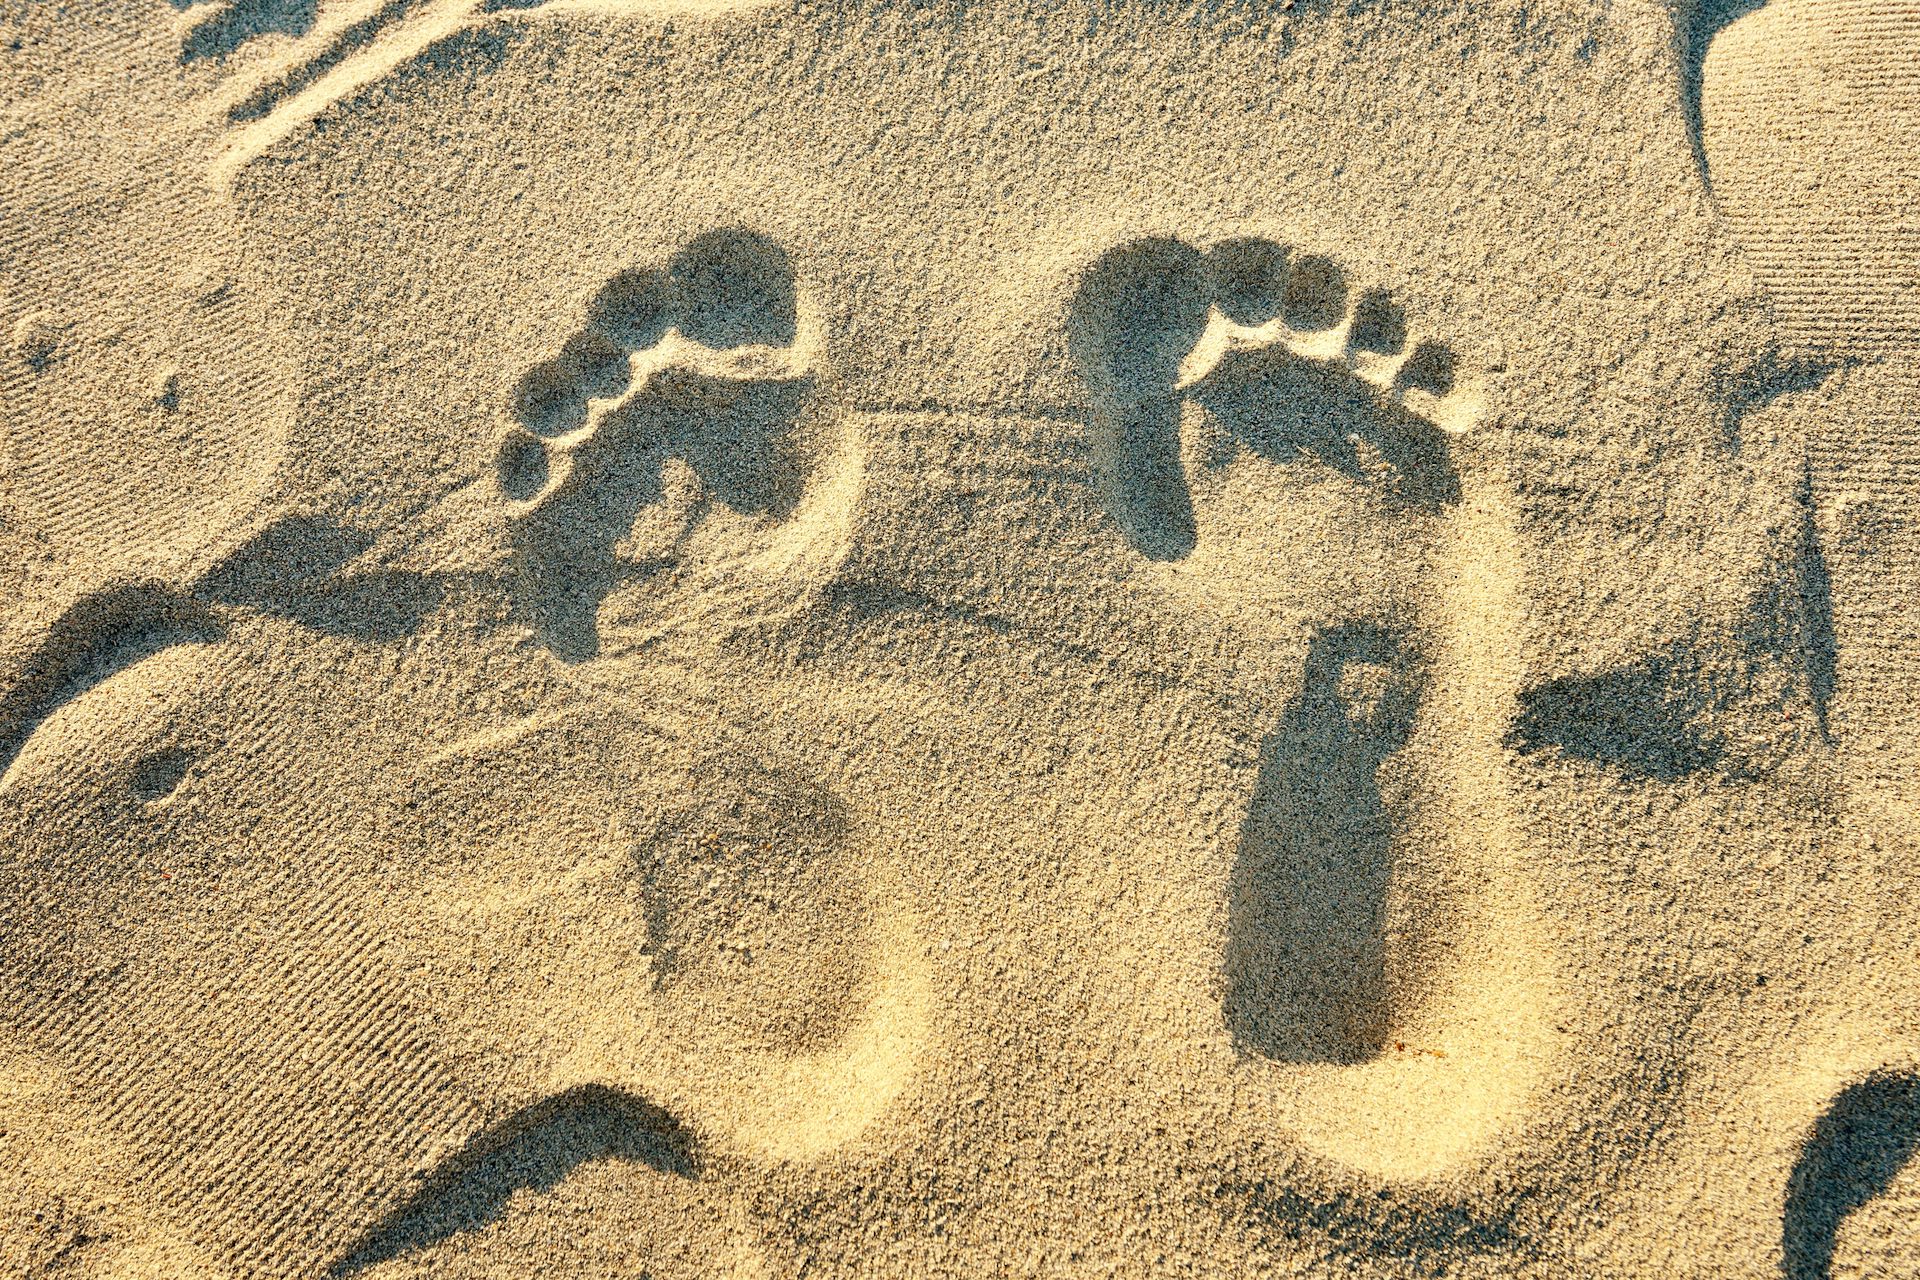 A casual stroll on the beach can leave enough intact DNA behind to extract identifiable information.